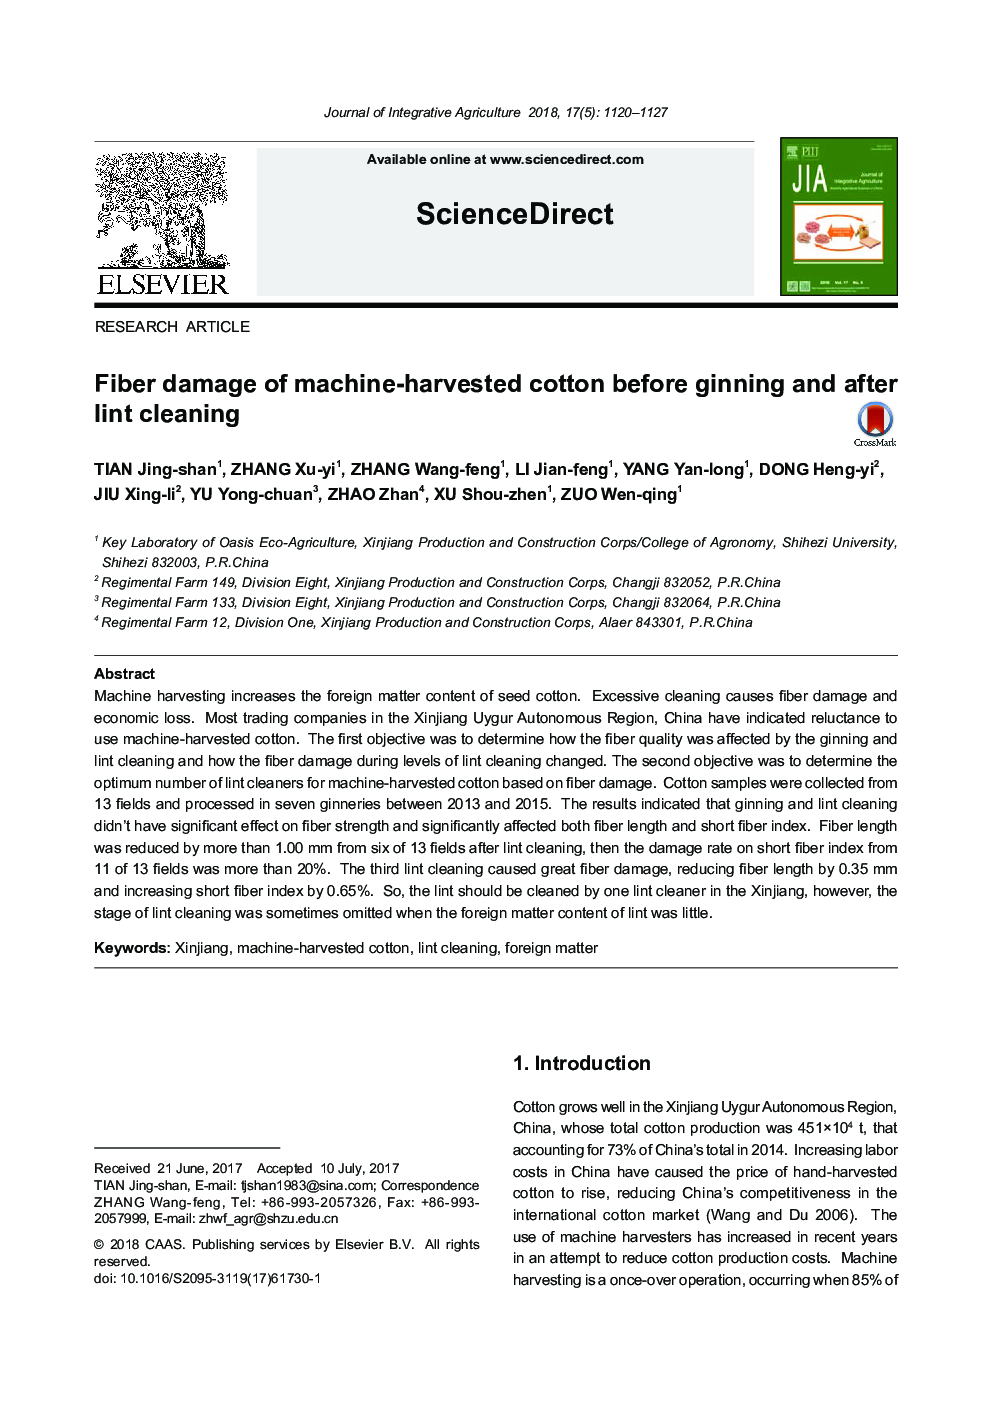 Fiber damage of machine-harvested cotton before ginning and after lint cleaning